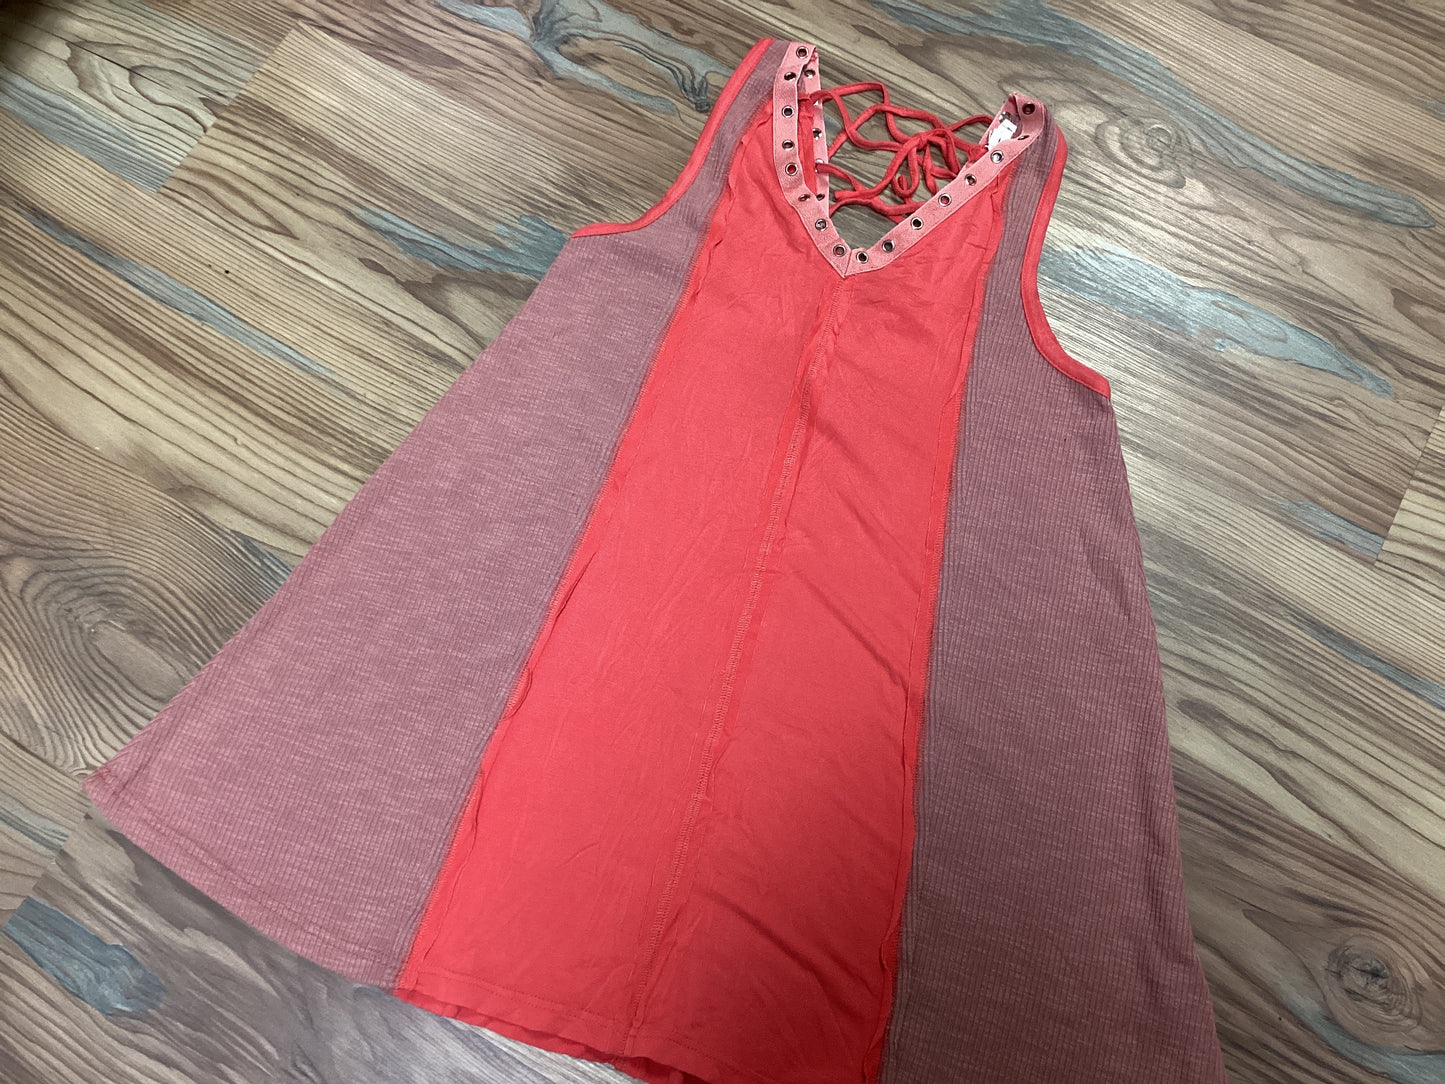 Ribbed Coral Criss Cross Dress